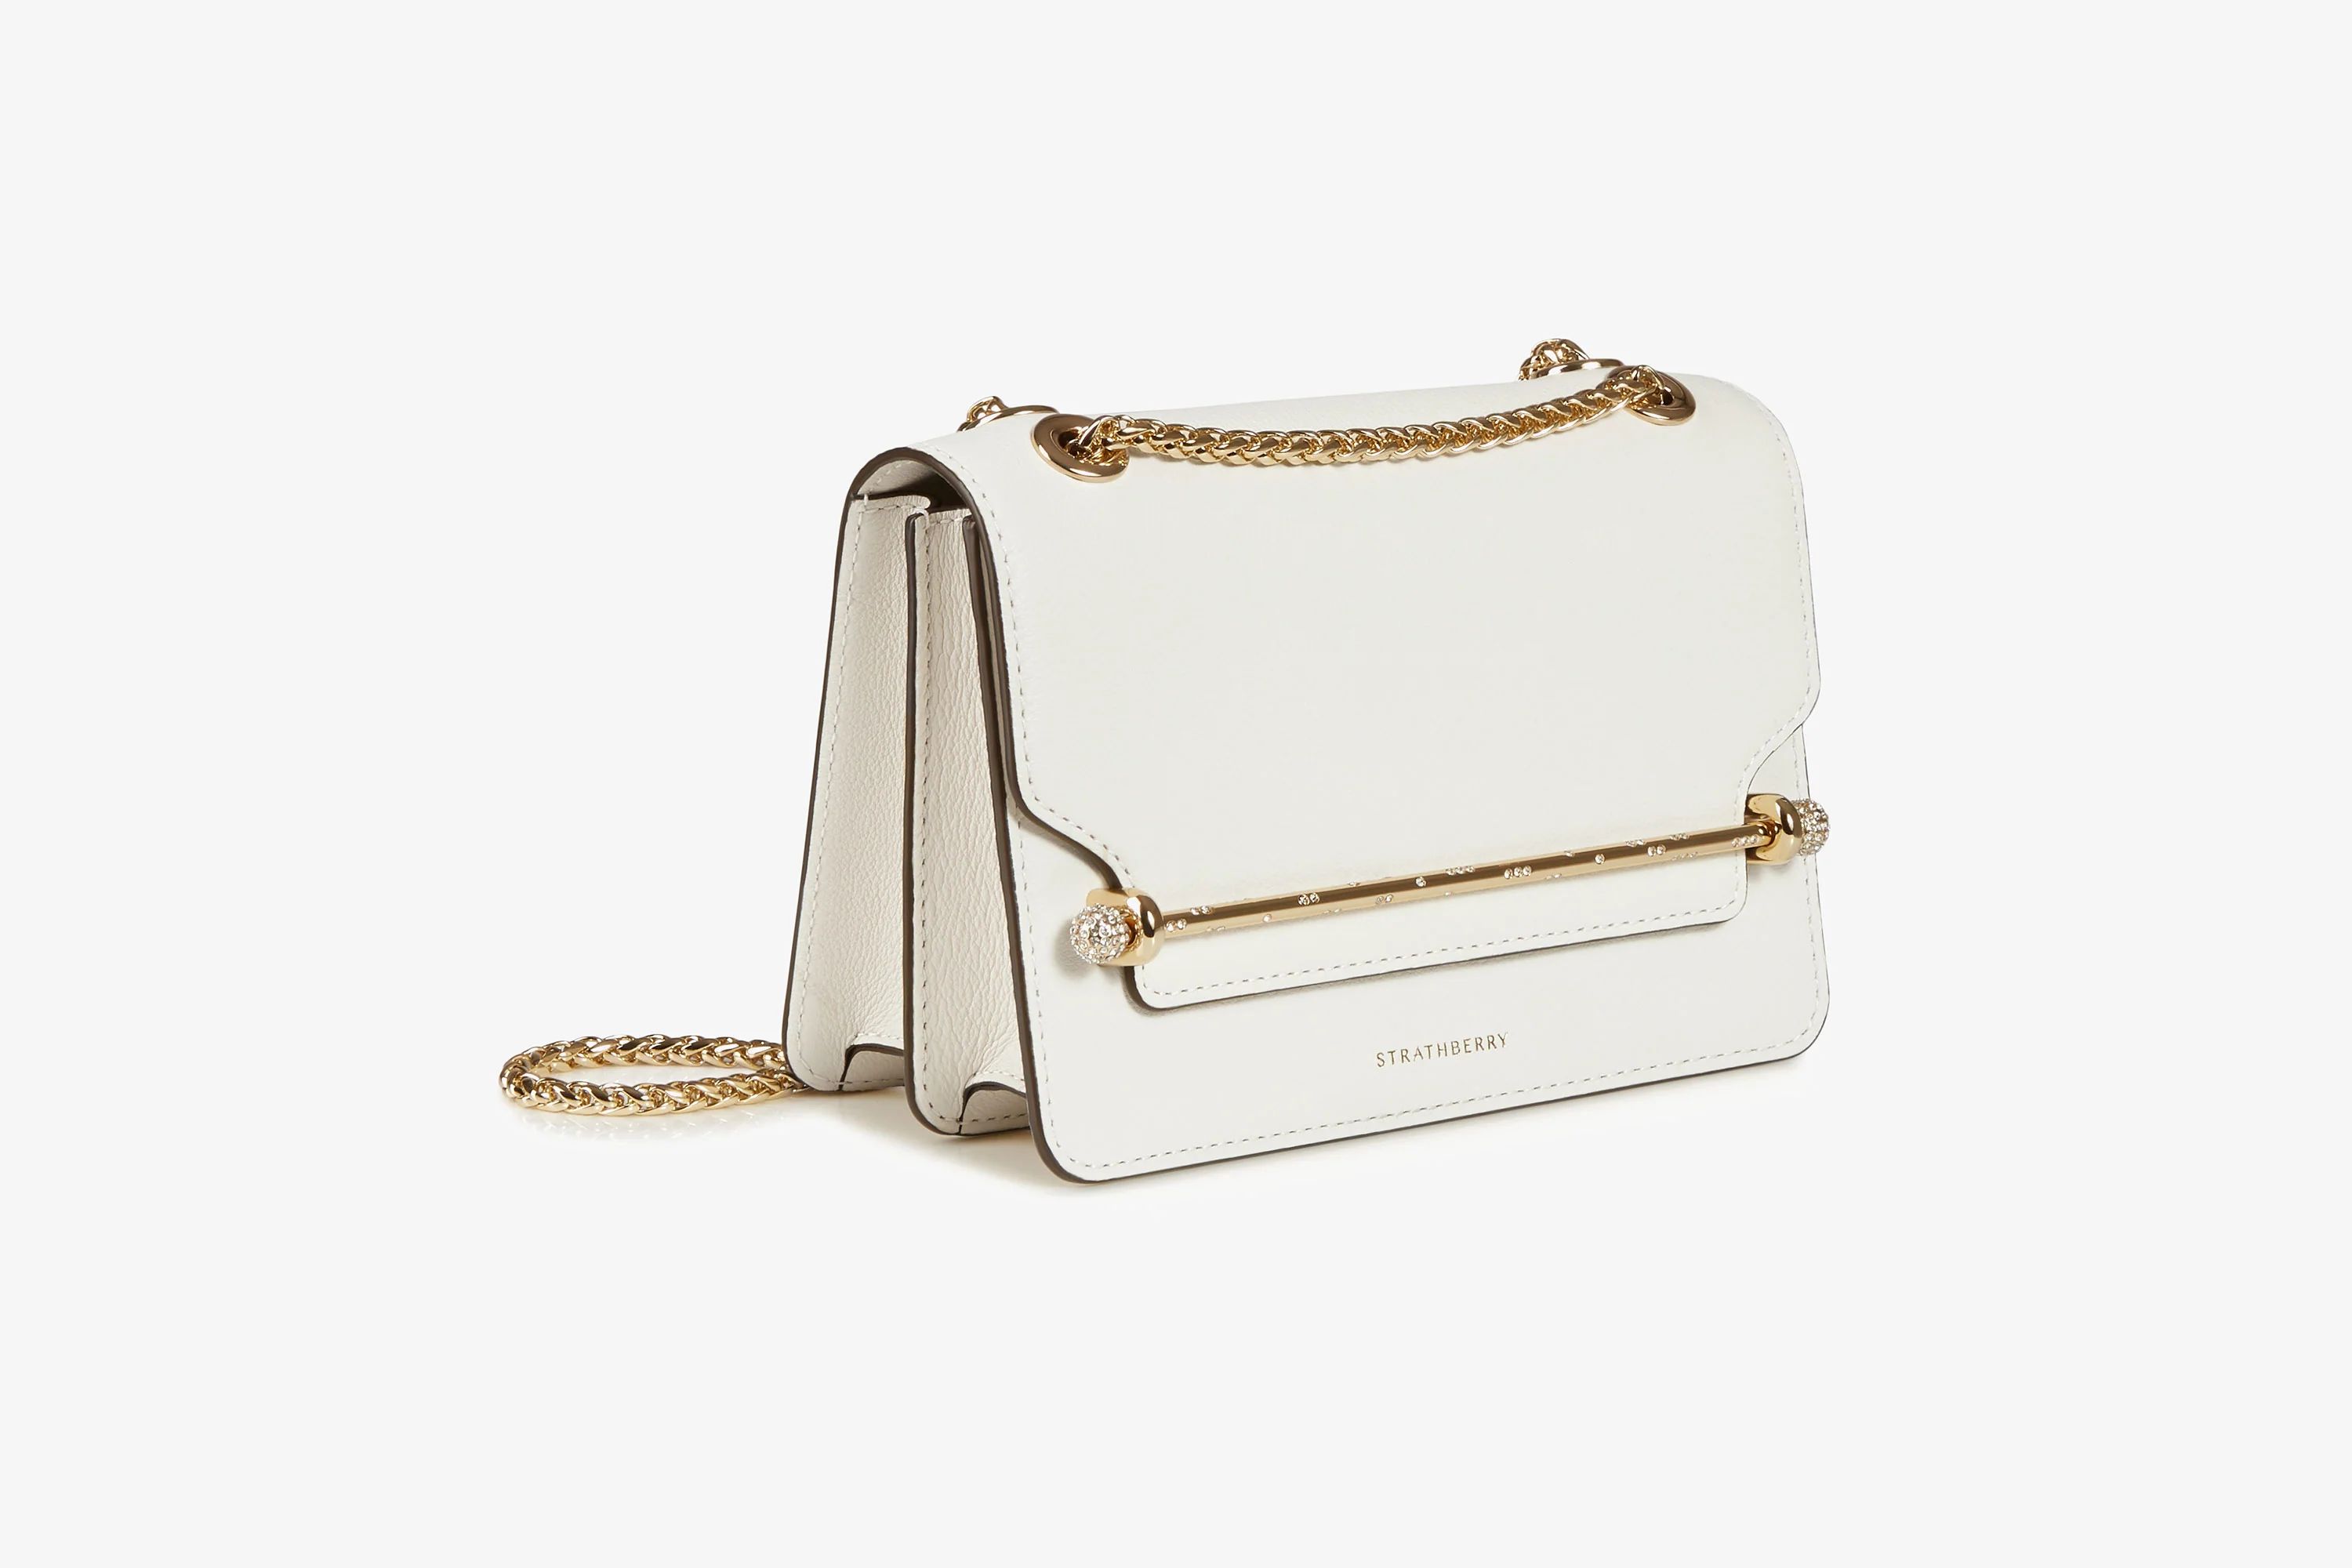 Strathberry - East/West Mini - Crossbody Leather Mini Handbag - Cream | Strathberry | Strathberry